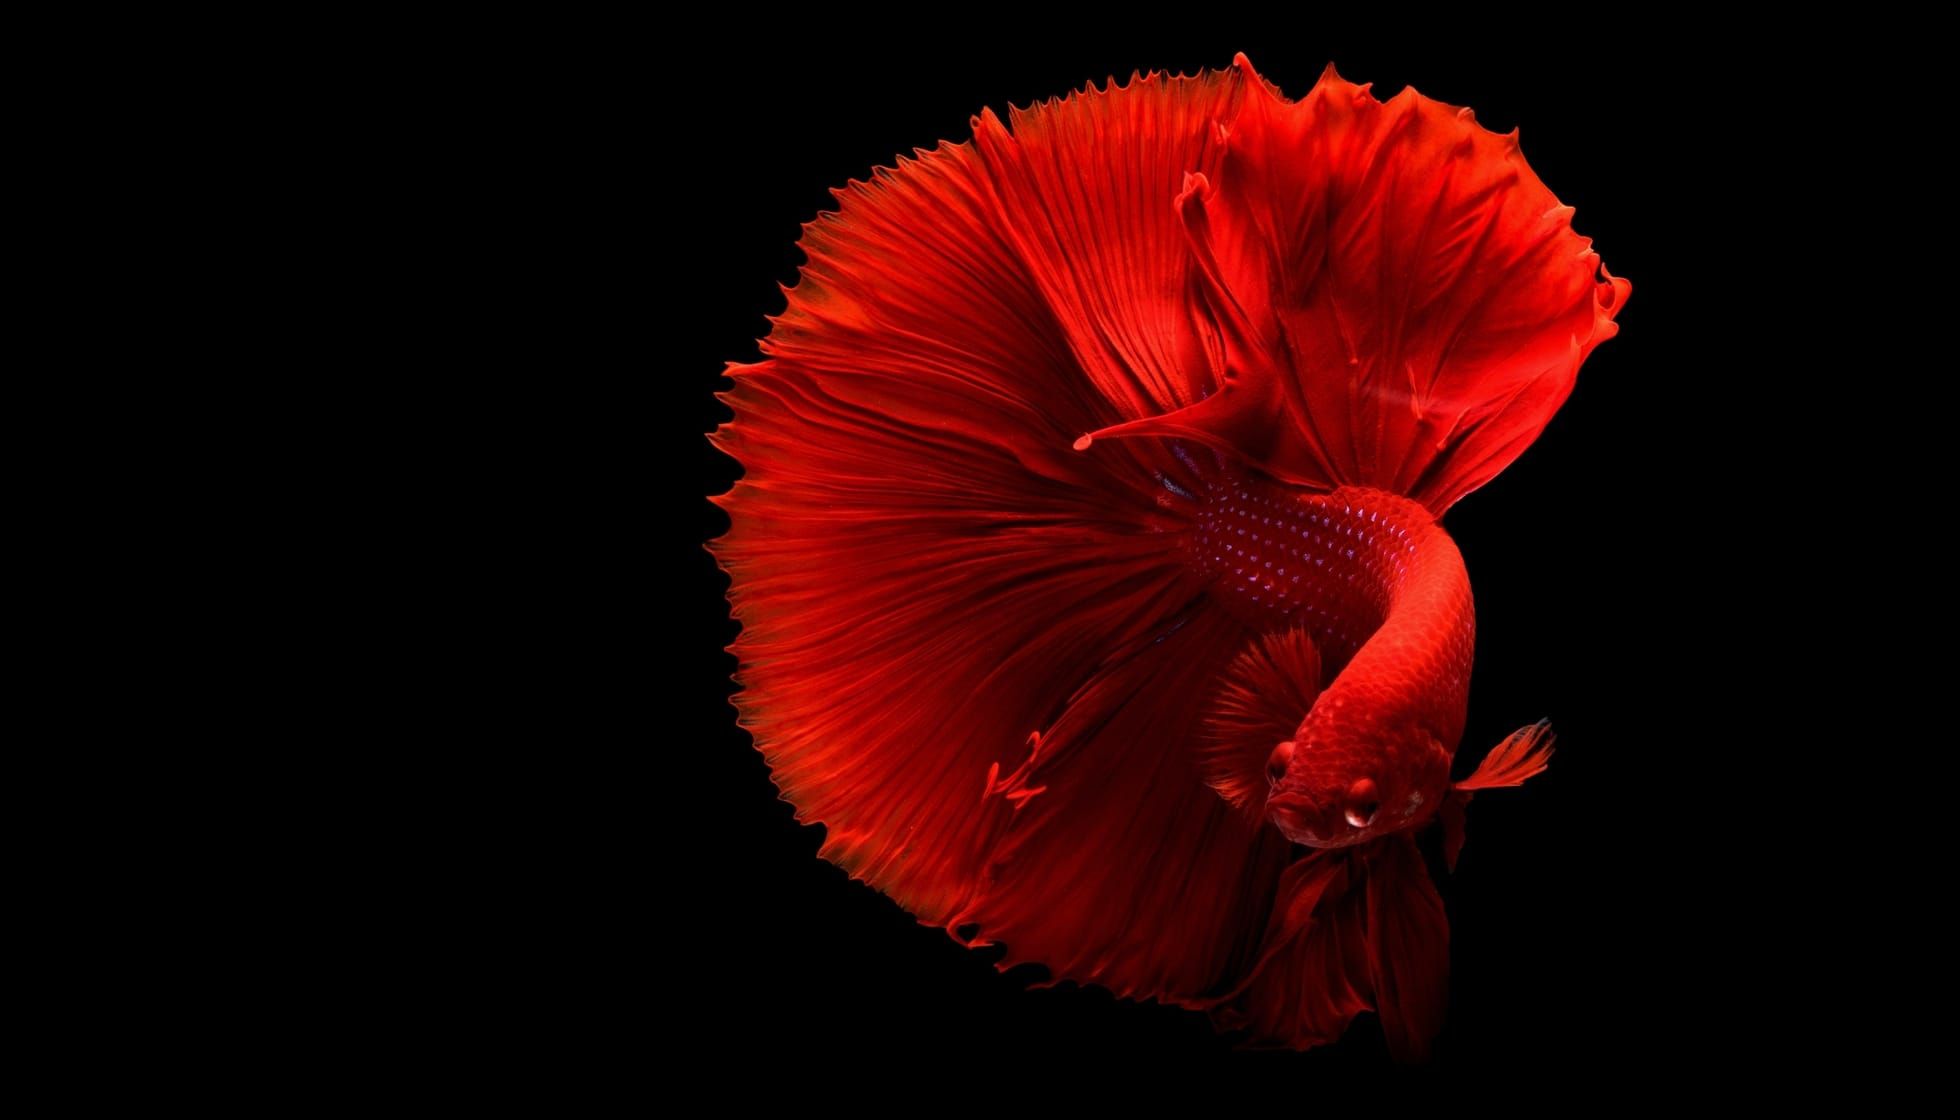 Red Siamese Fighting Fish isolated on black background